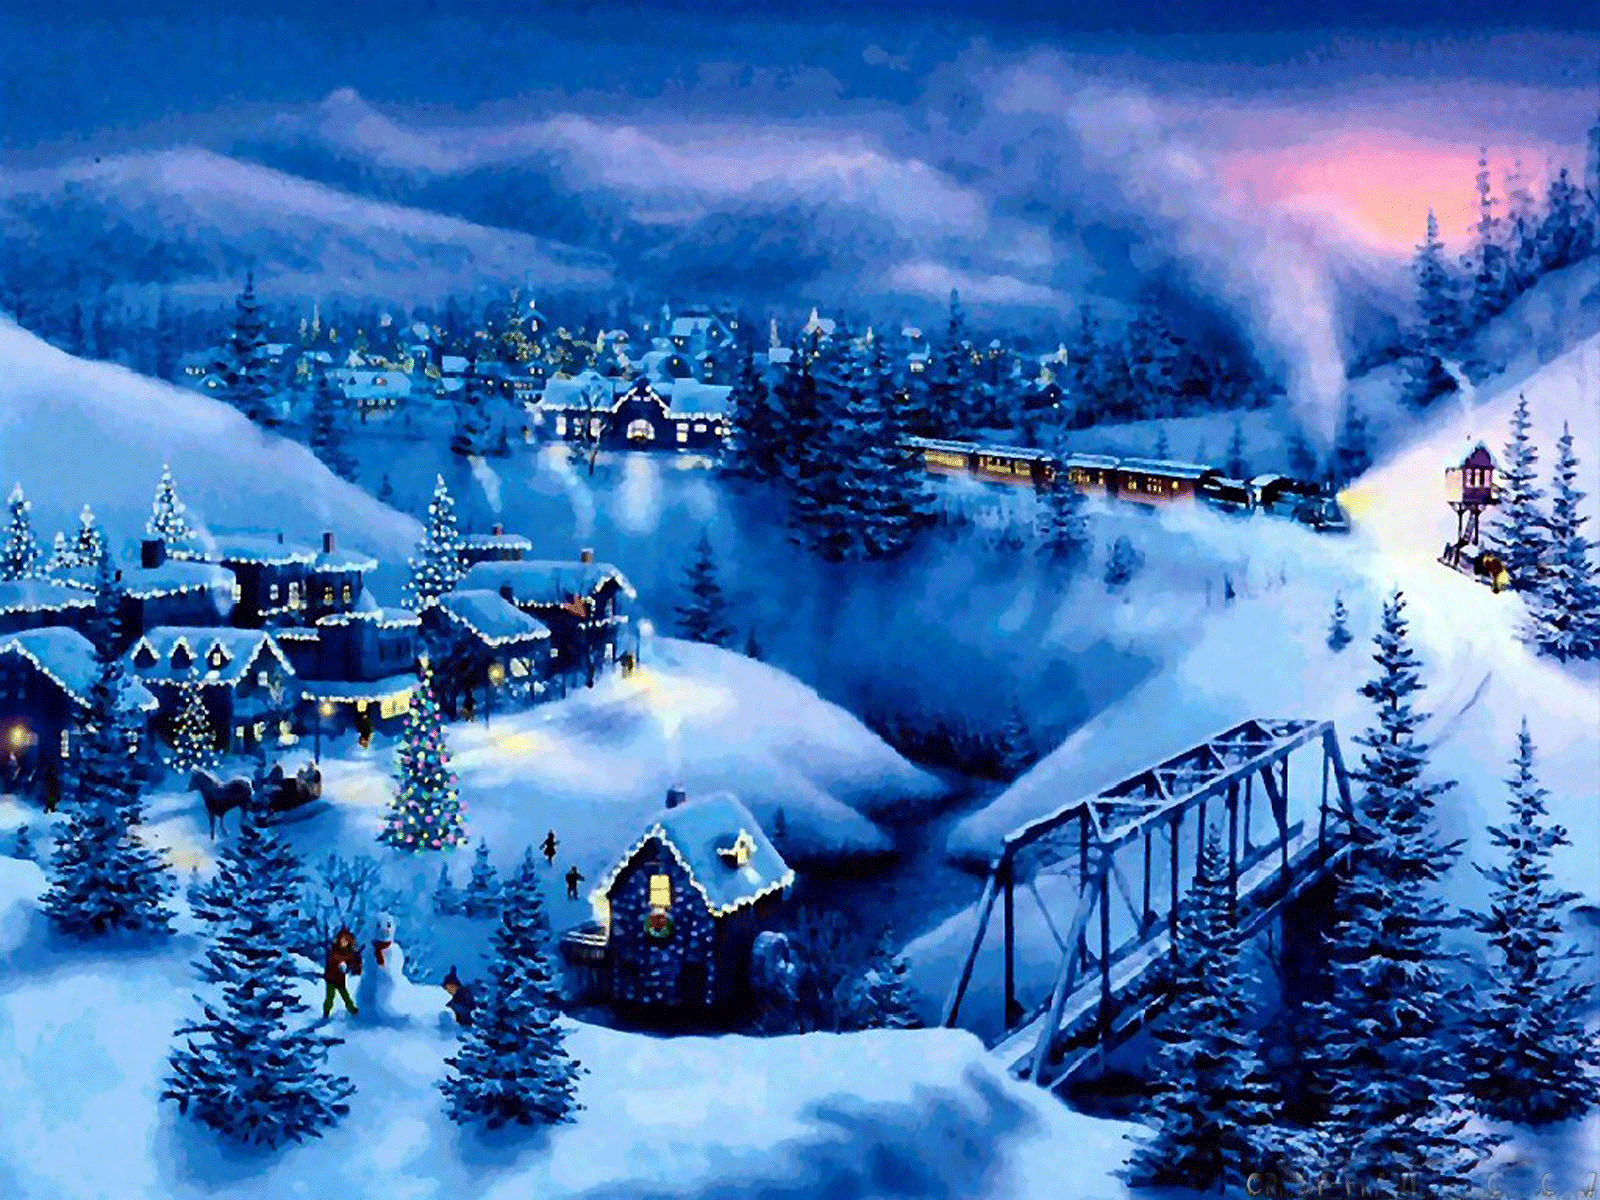 Night In Christmas Town Wallpaper, Night In Christmas Town